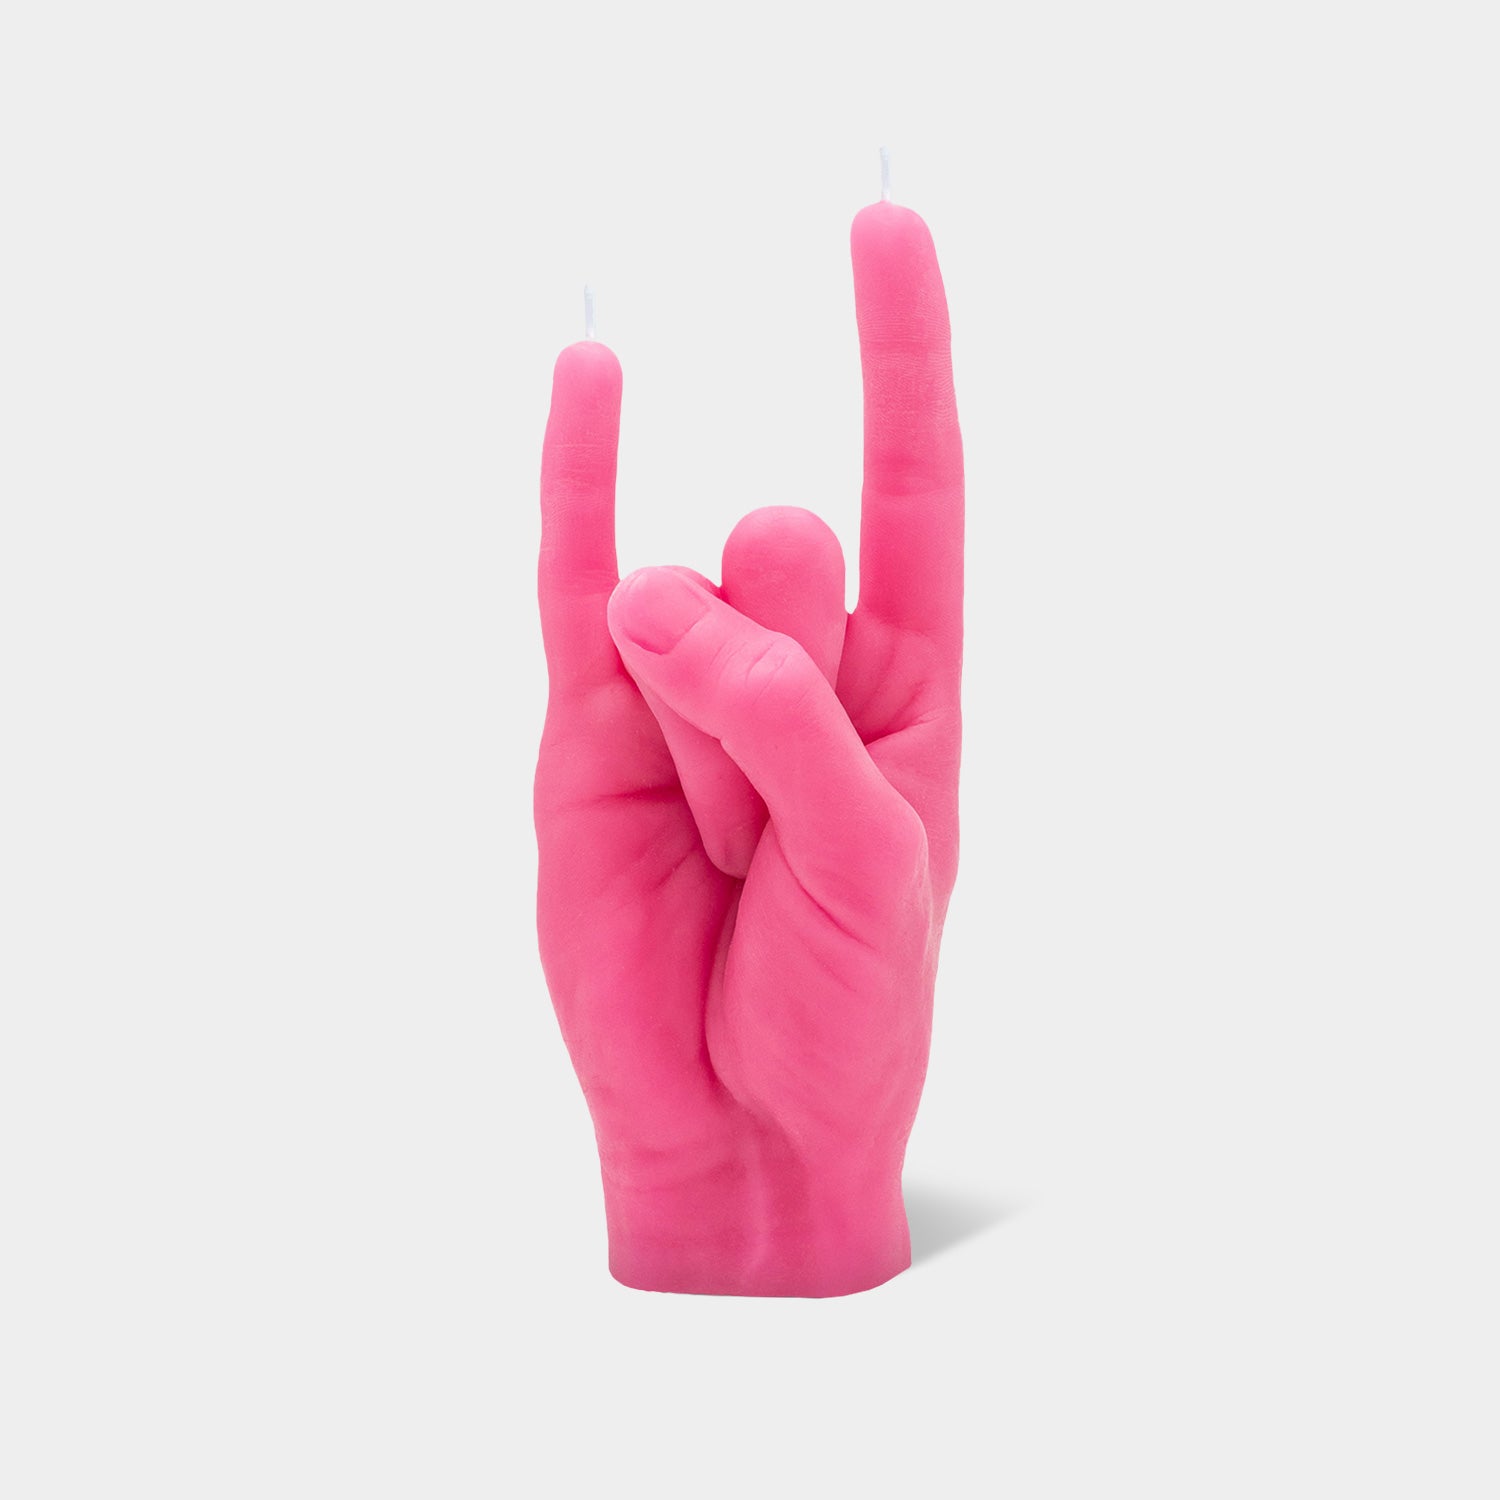 CandleHand Hand Gesture Candle - Middle Finger White by 54 Celsius